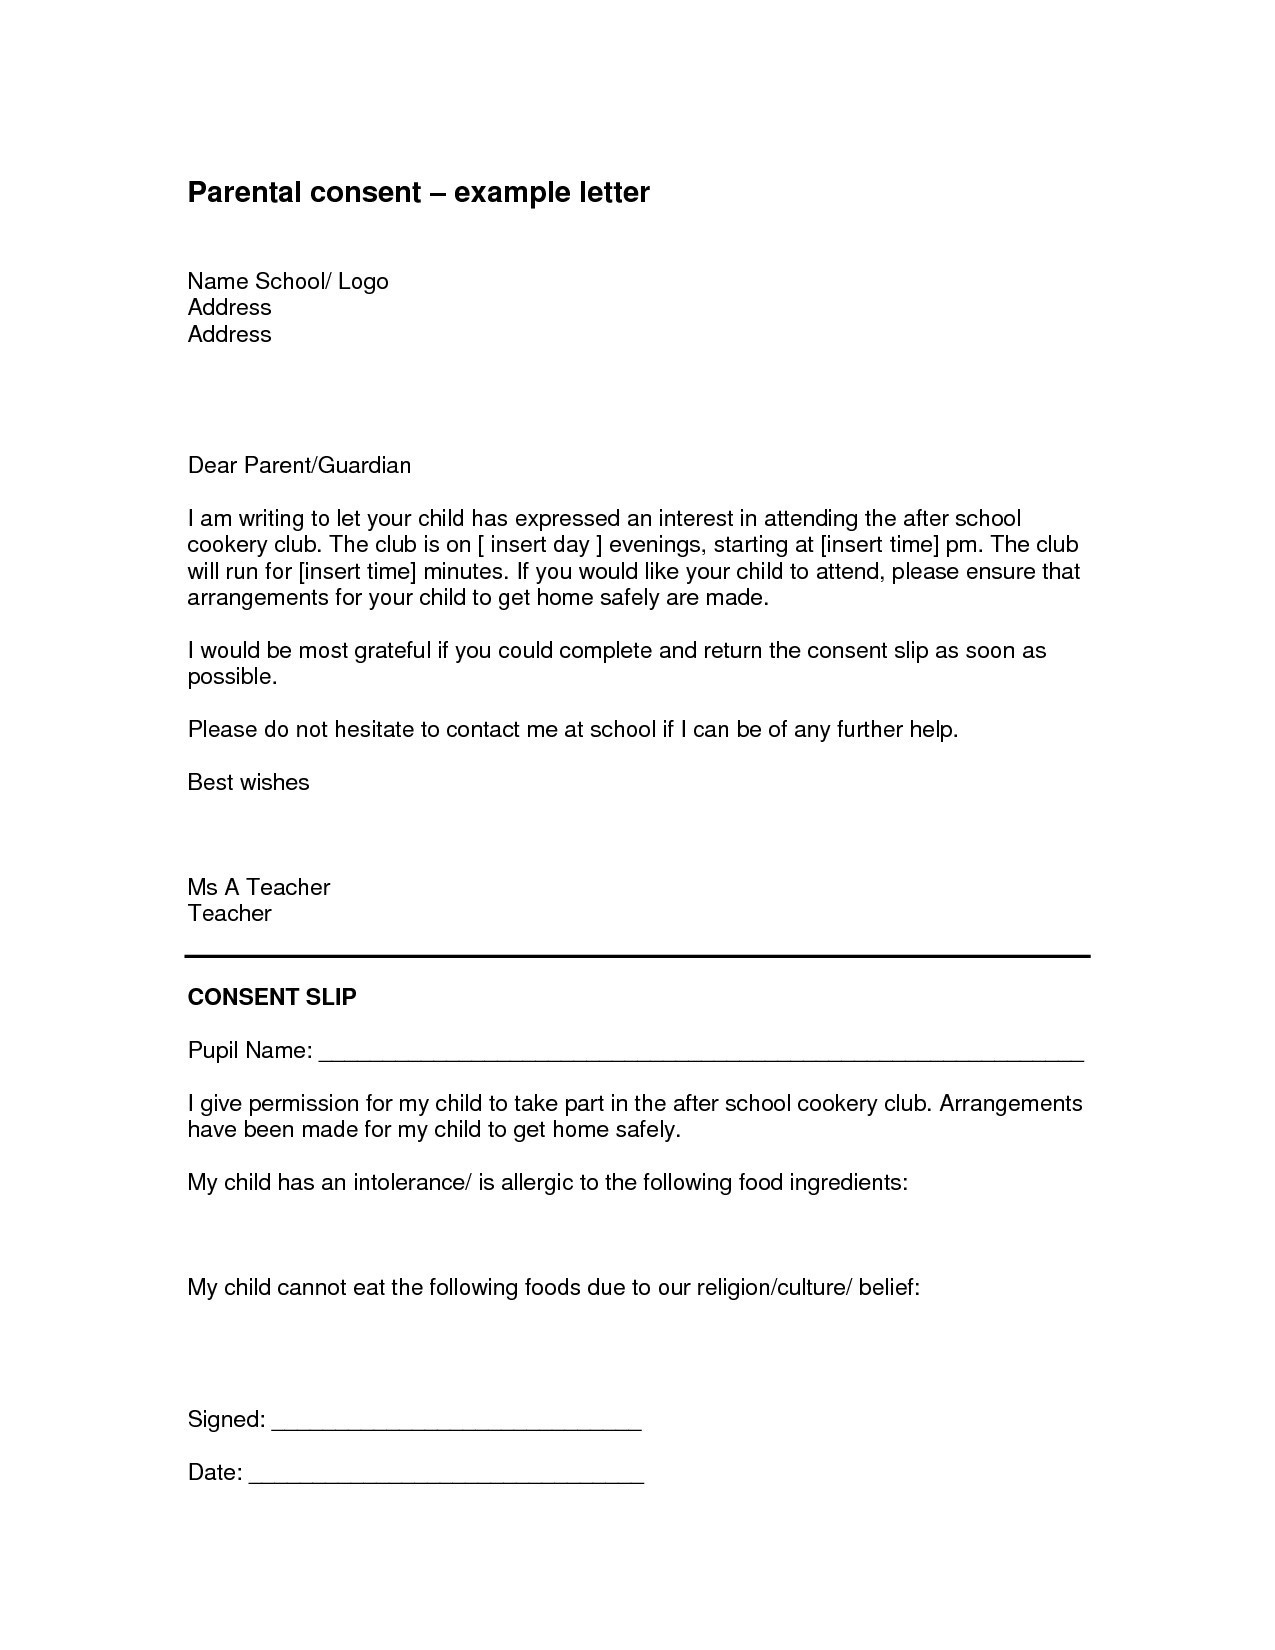 permission to travel letter template example-Permission Letter to Travel Save Sample Permission to Travel Letter Best Consent Letter format Best 4-f